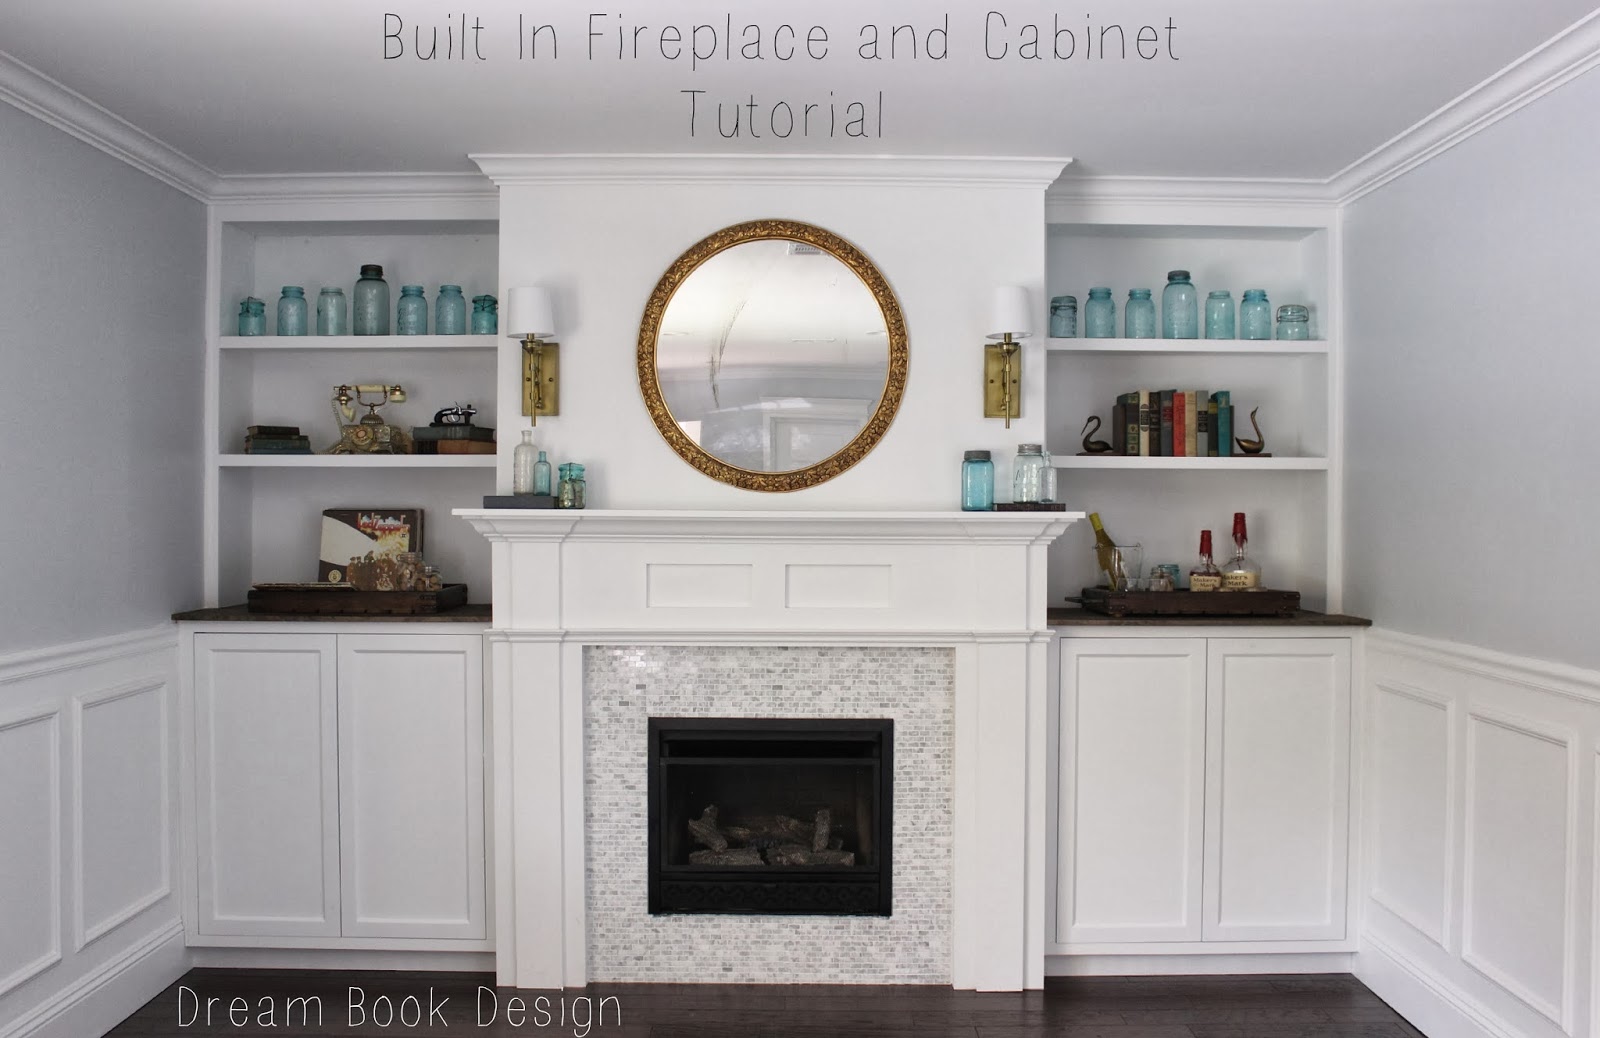 Fireplace And Cabinets Tutorial, How To Build Bookcase Around Fireplace